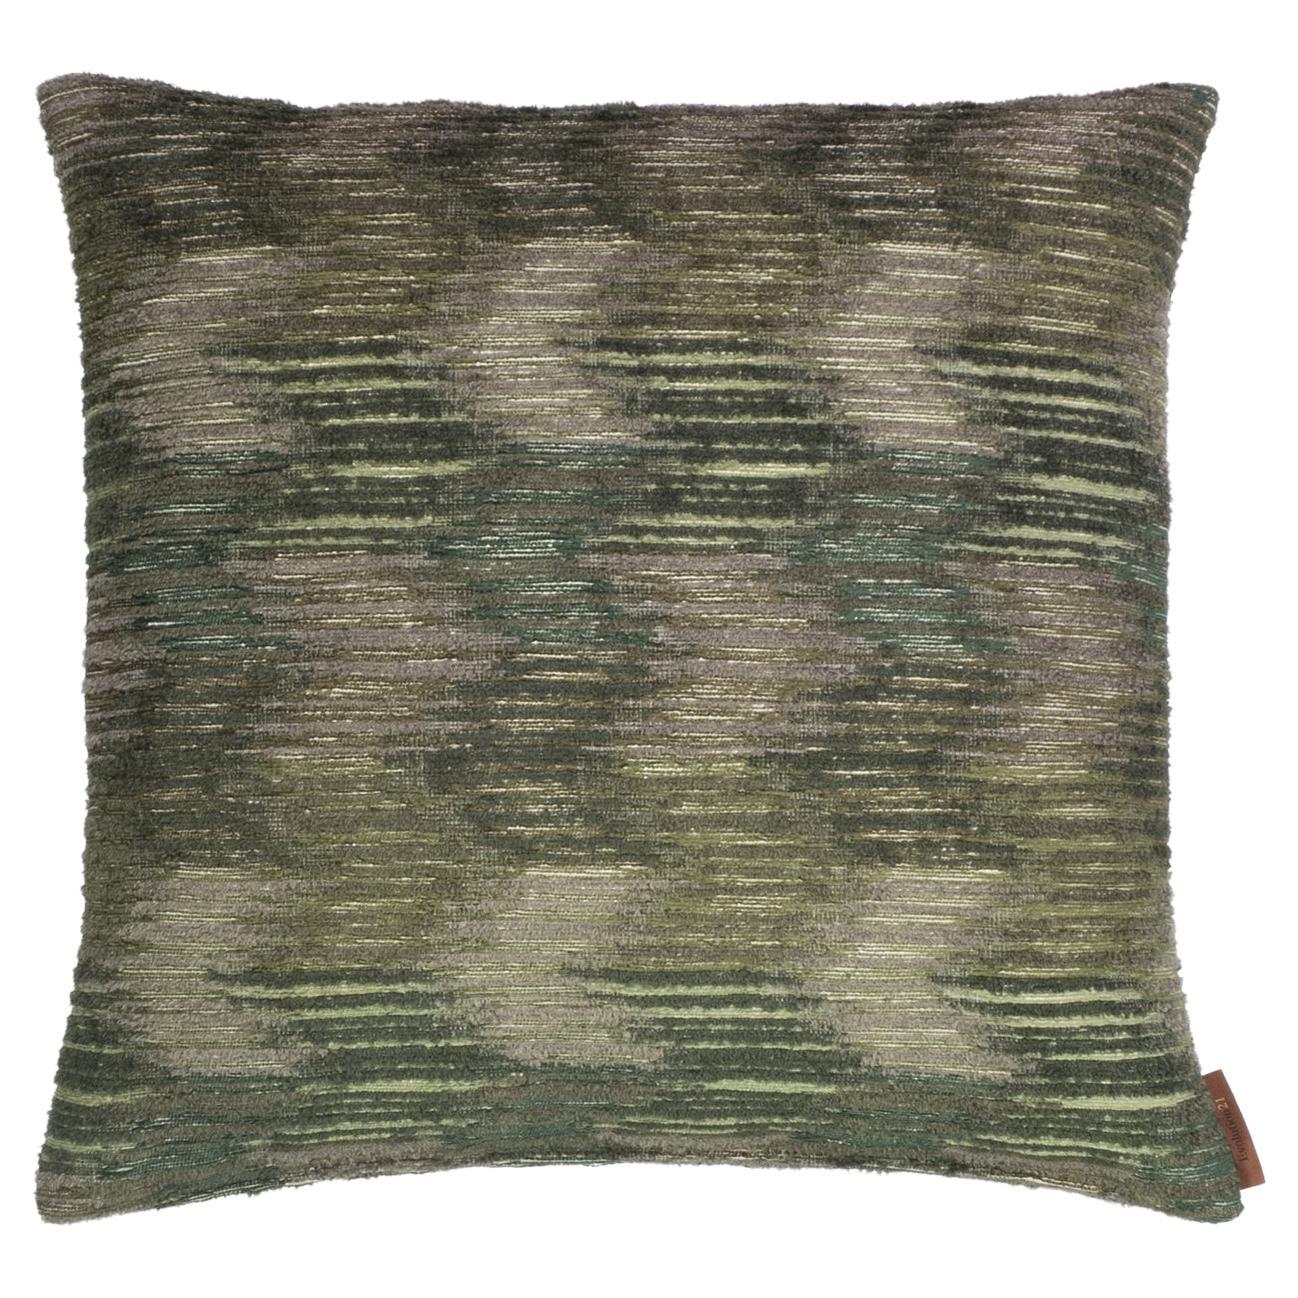 Modern Throw Pillow Green "Micca" Pistache Reverse by Evolution21 For Sale